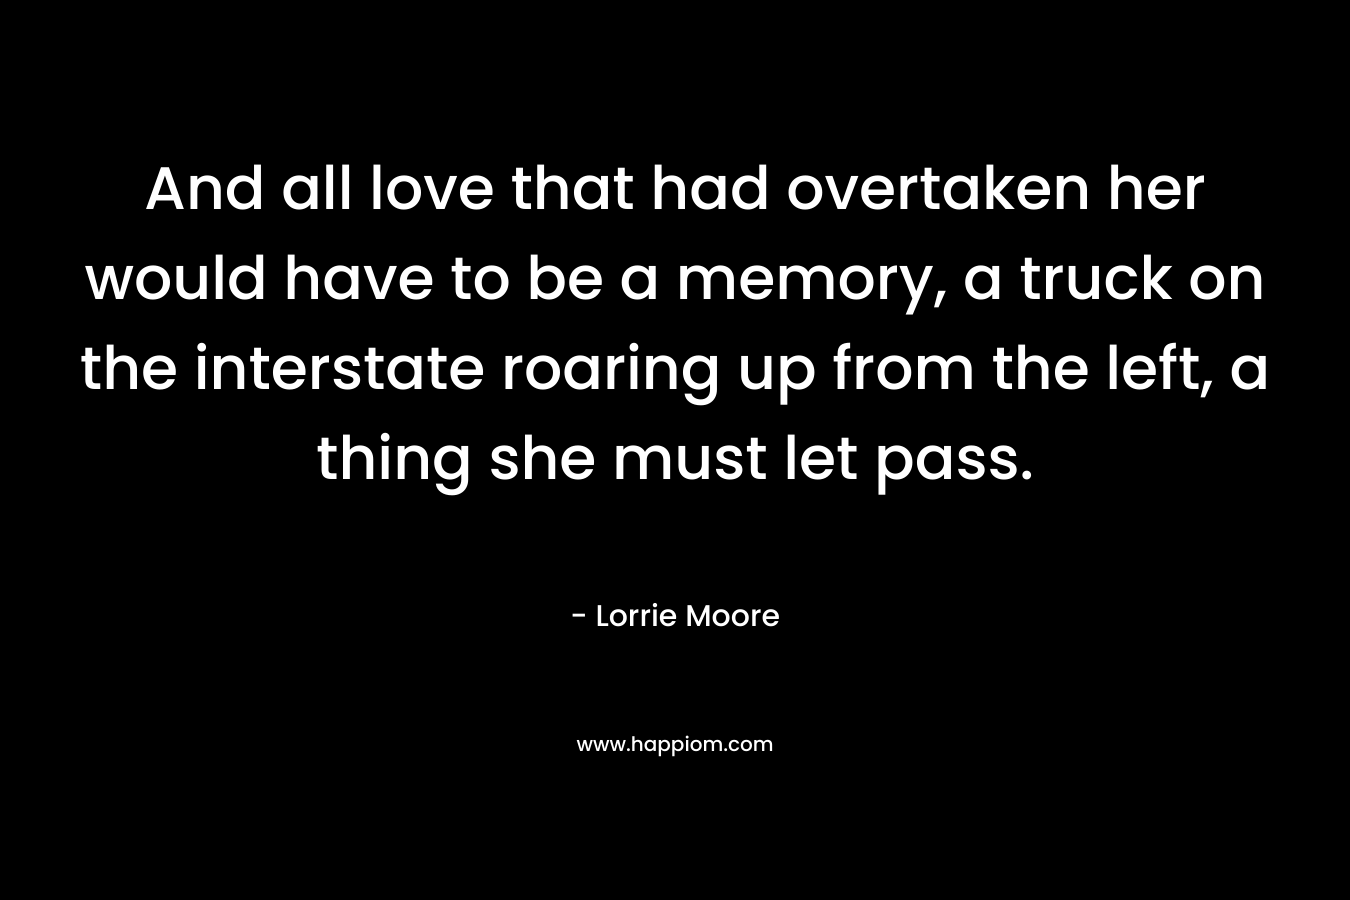 And all love that had overtaken her would have to be a memory, a truck on the interstate roaring up from the left, a thing she must let pass. – Lorrie Moore